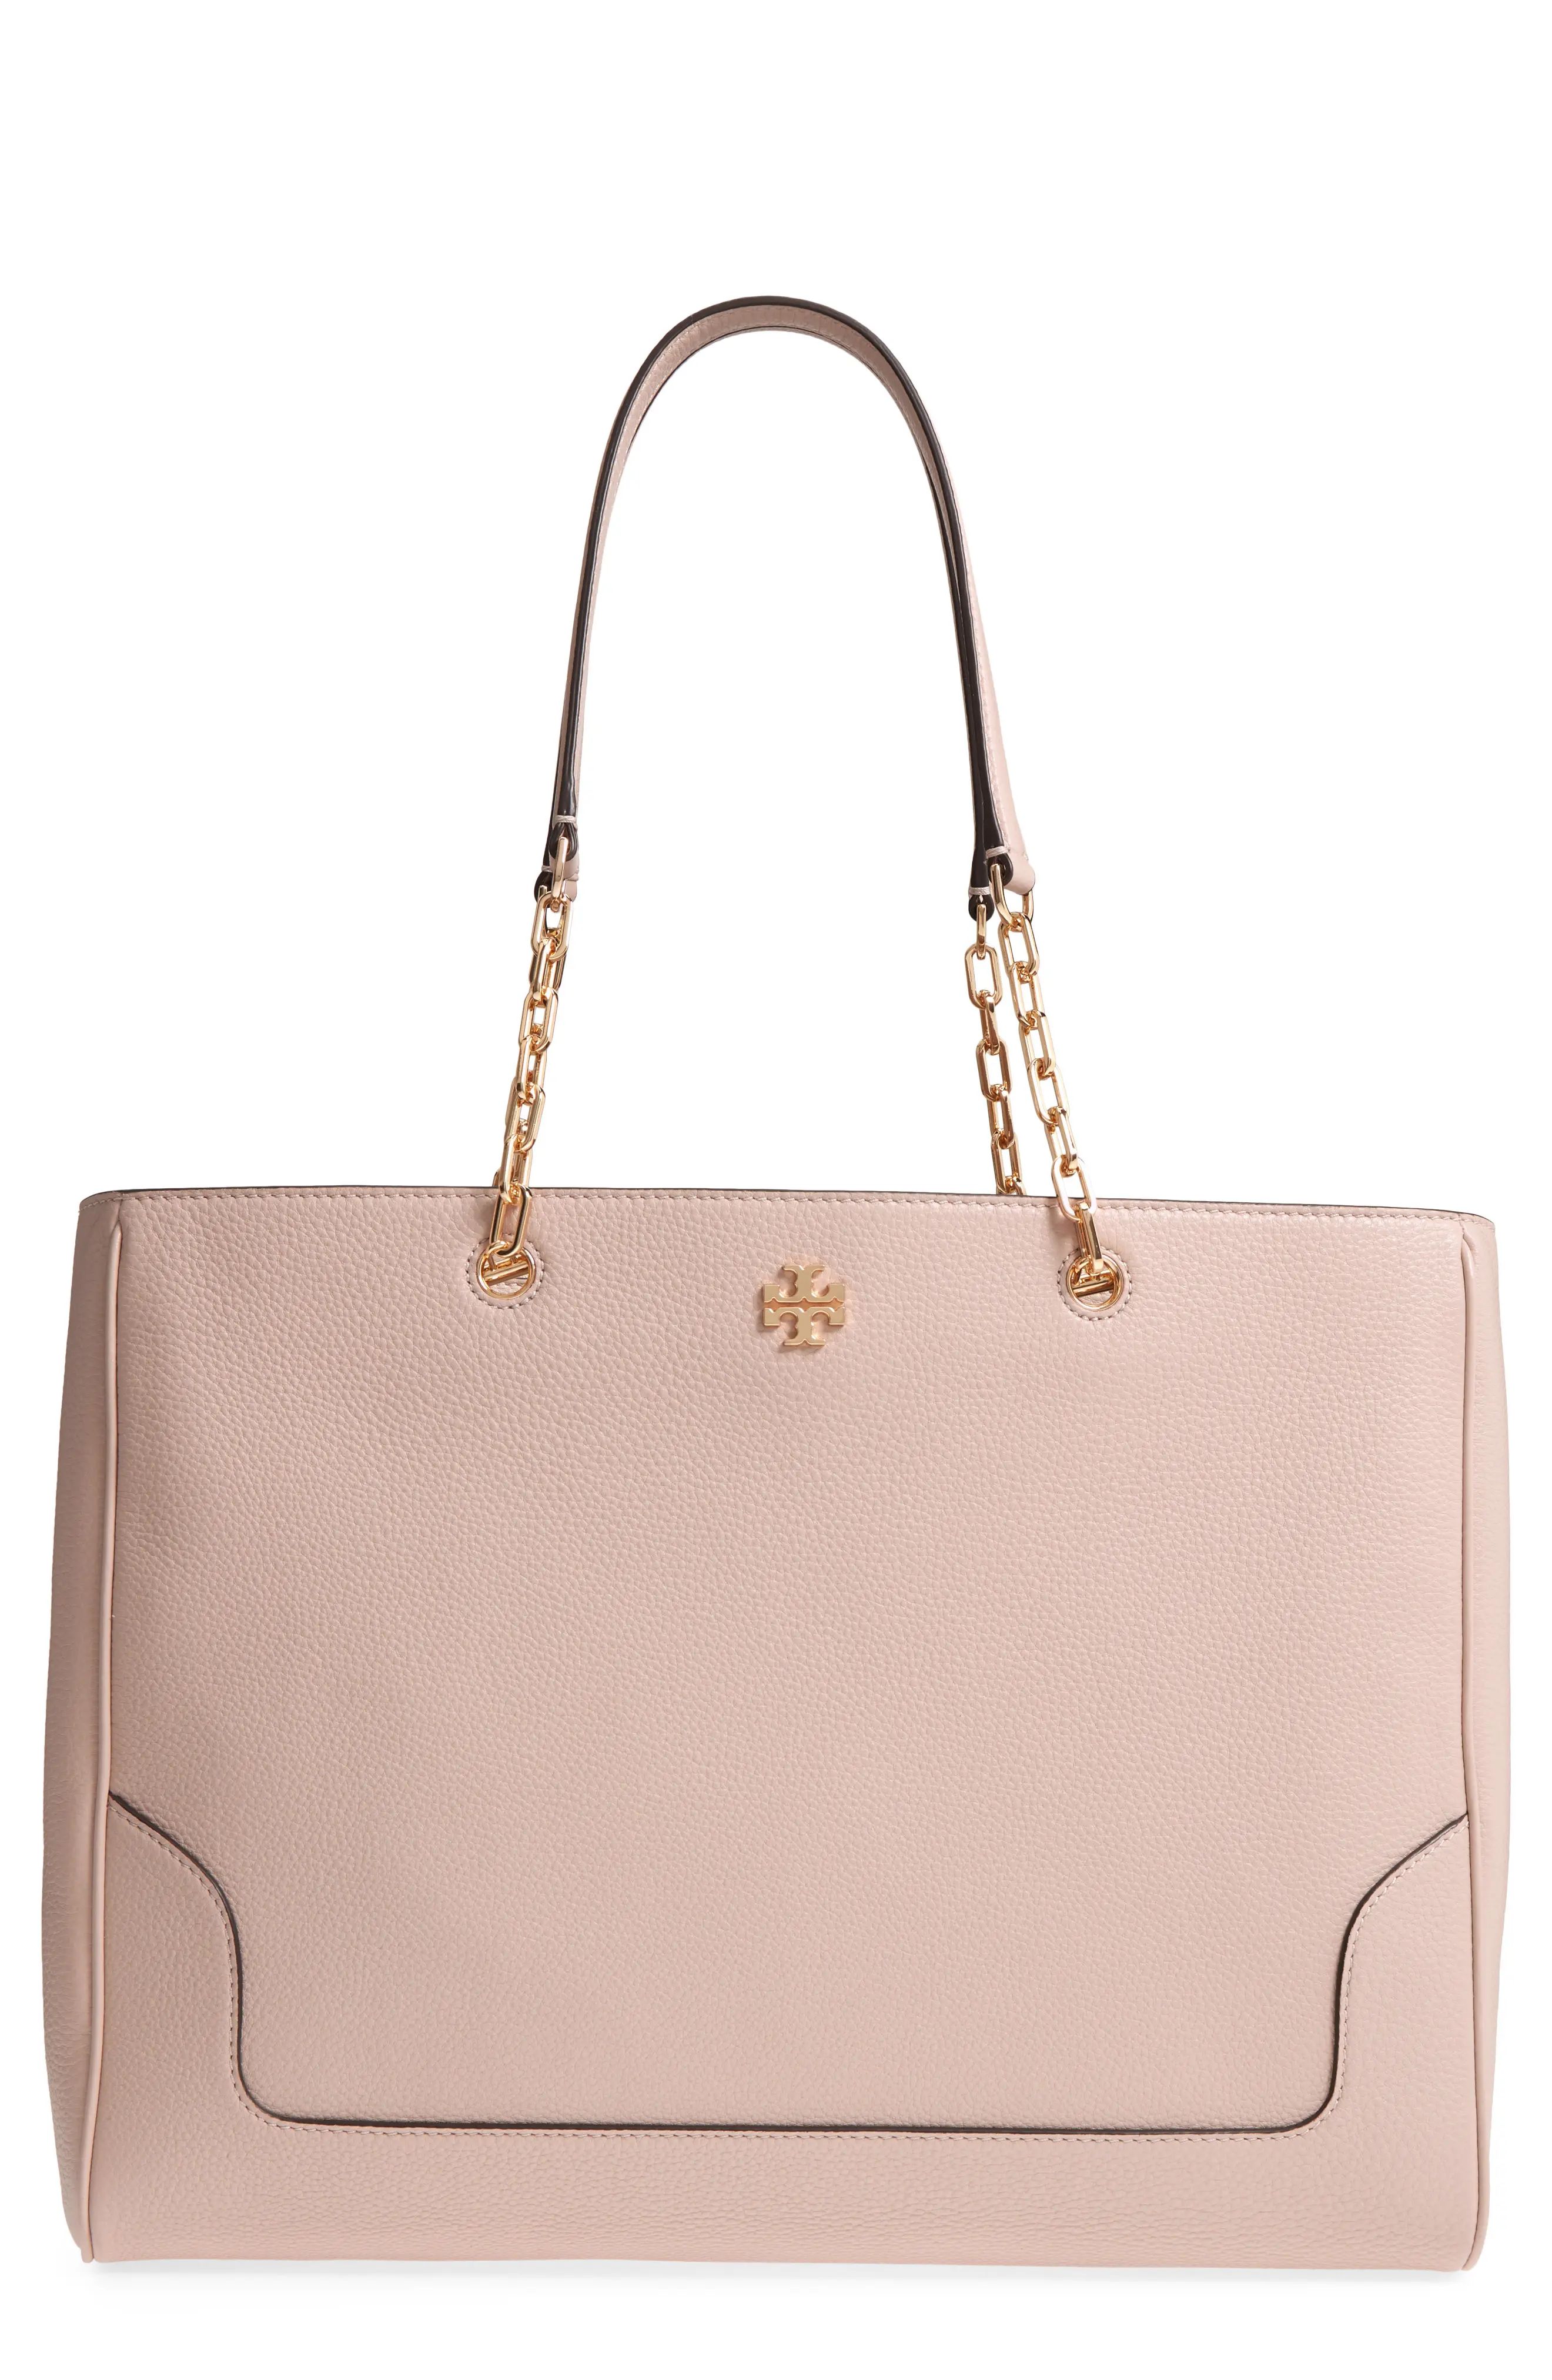 Tory Burch Marsden Pebbled Leather Tote | Nordstrom